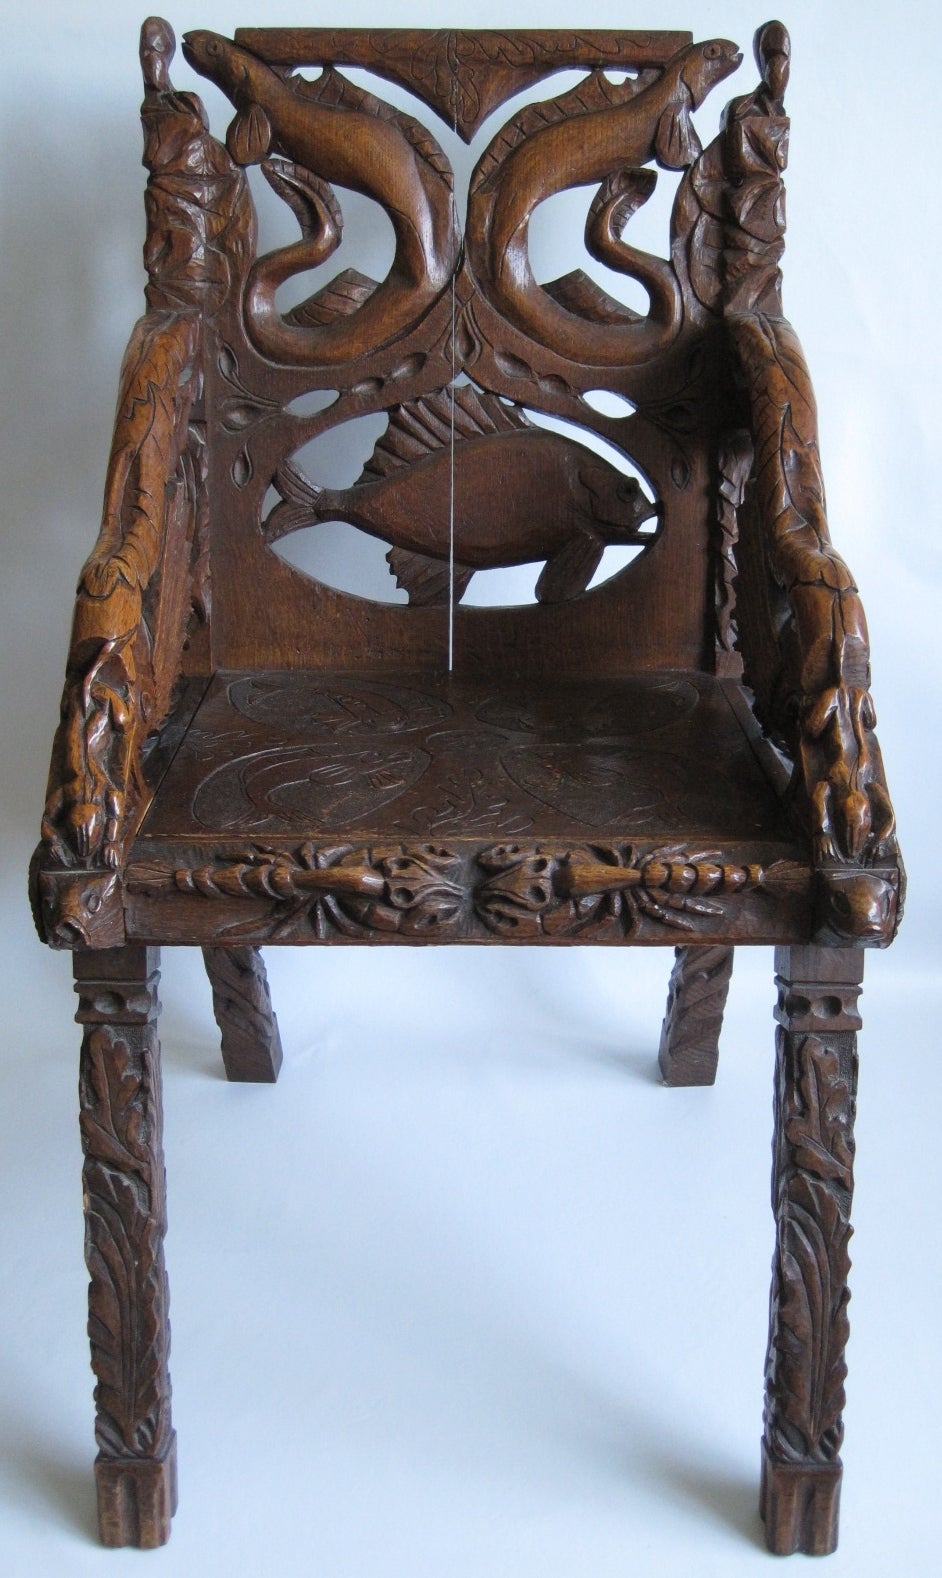 North American Folk Art Chair, Signed and Heavily Carved, circa 1900